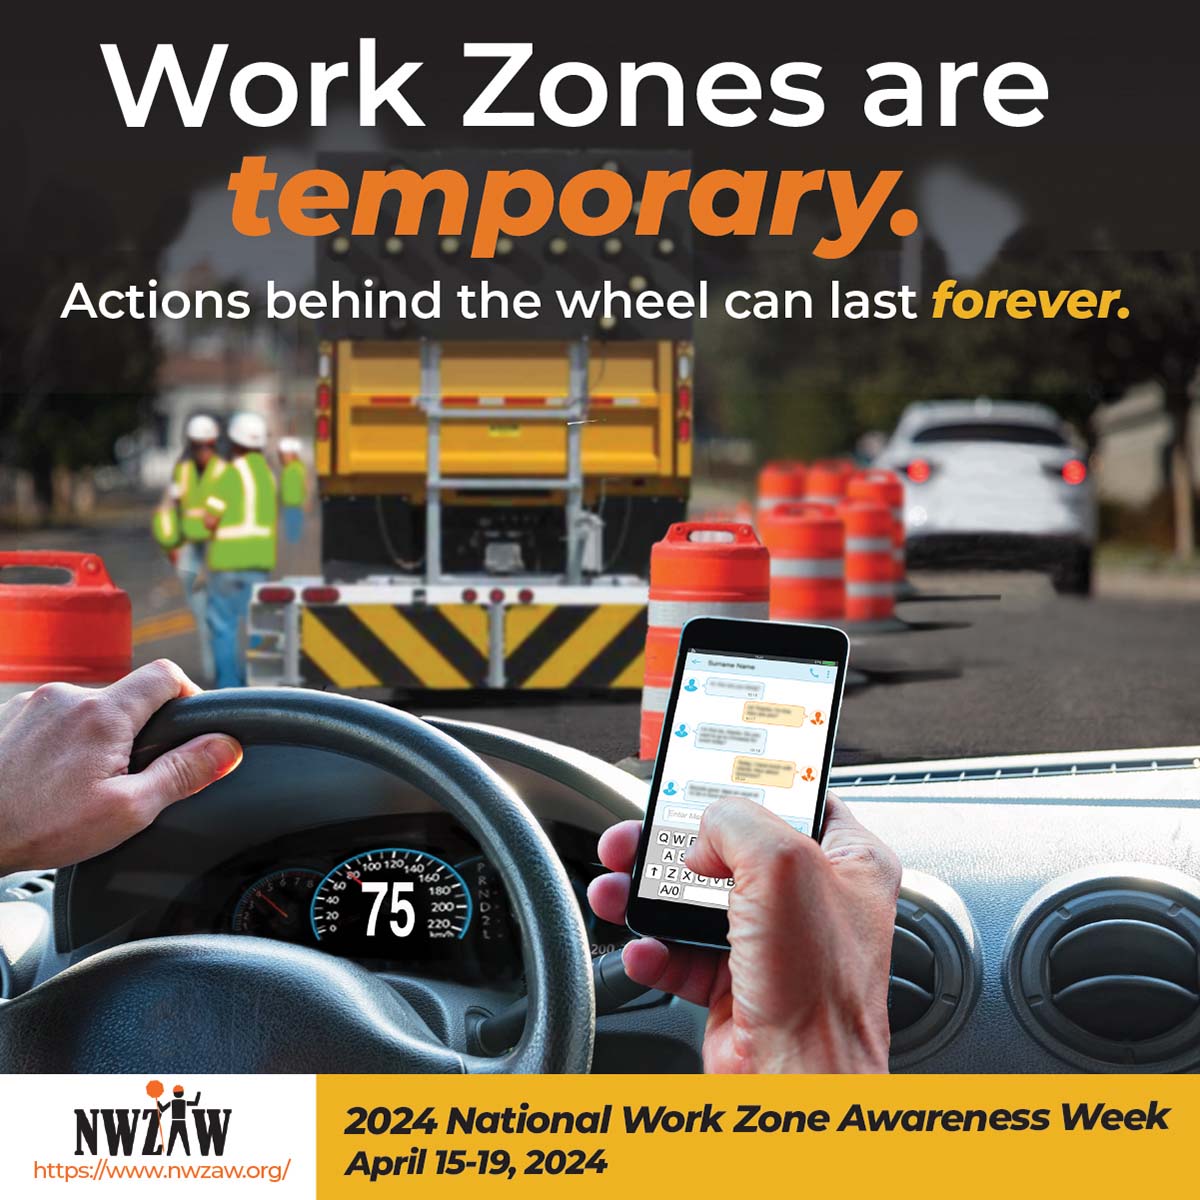 Distracted driving is a danger to everyone on the road, especially roadside workers. Stay focused behind the wheel.
#NWZAW #WatchForUs